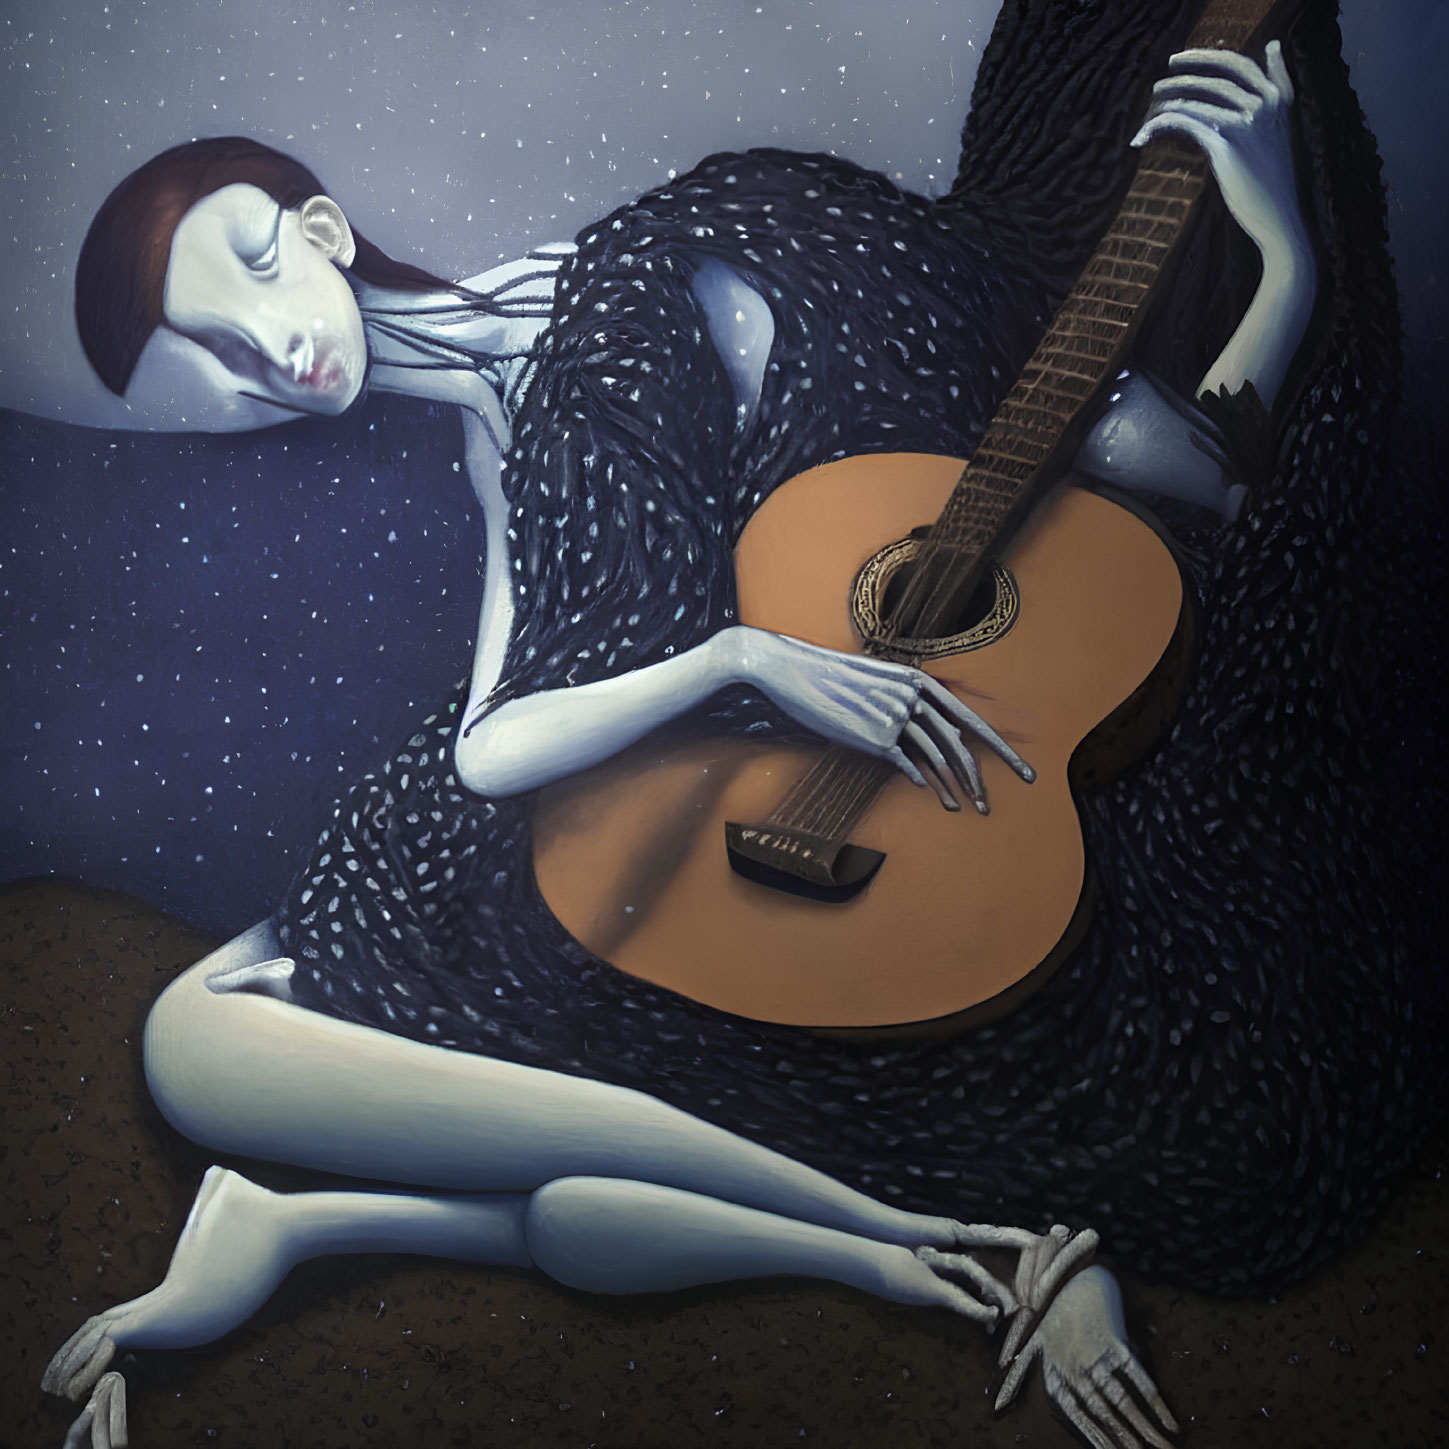 Surreal painting of person with dark hair fused with guitar in night setting